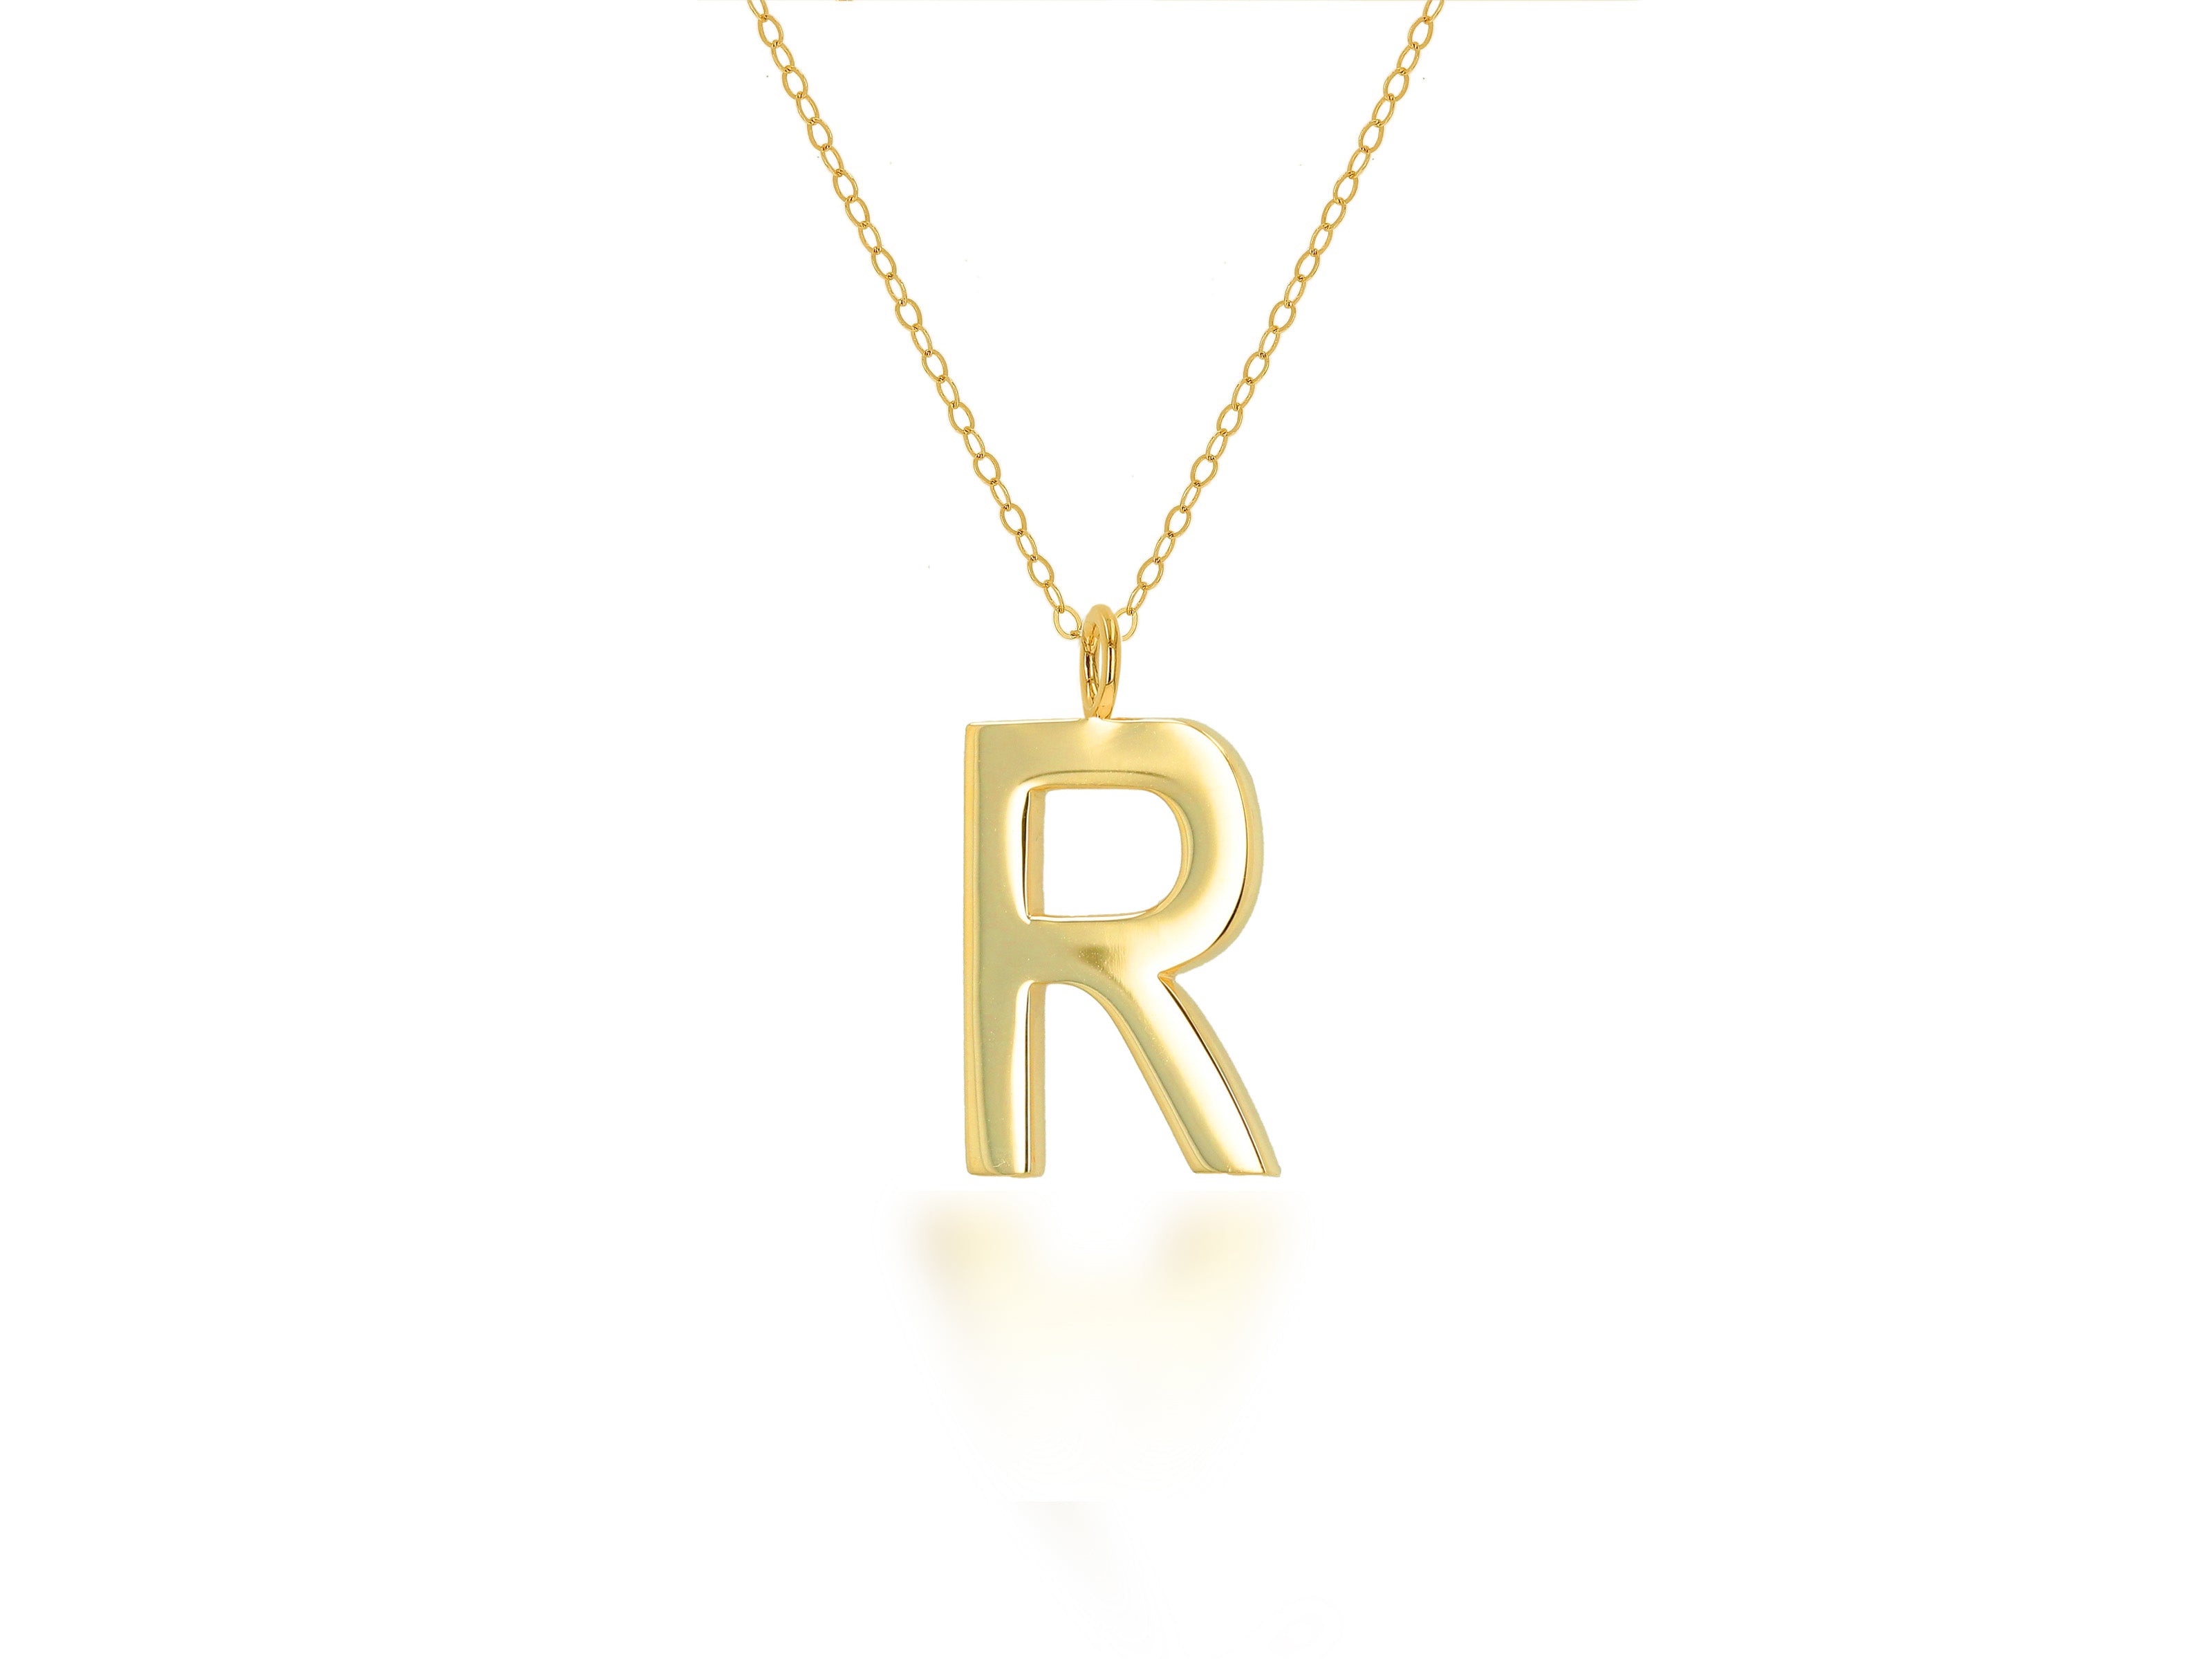 Oversized Block Letter Charm With Cable Chain